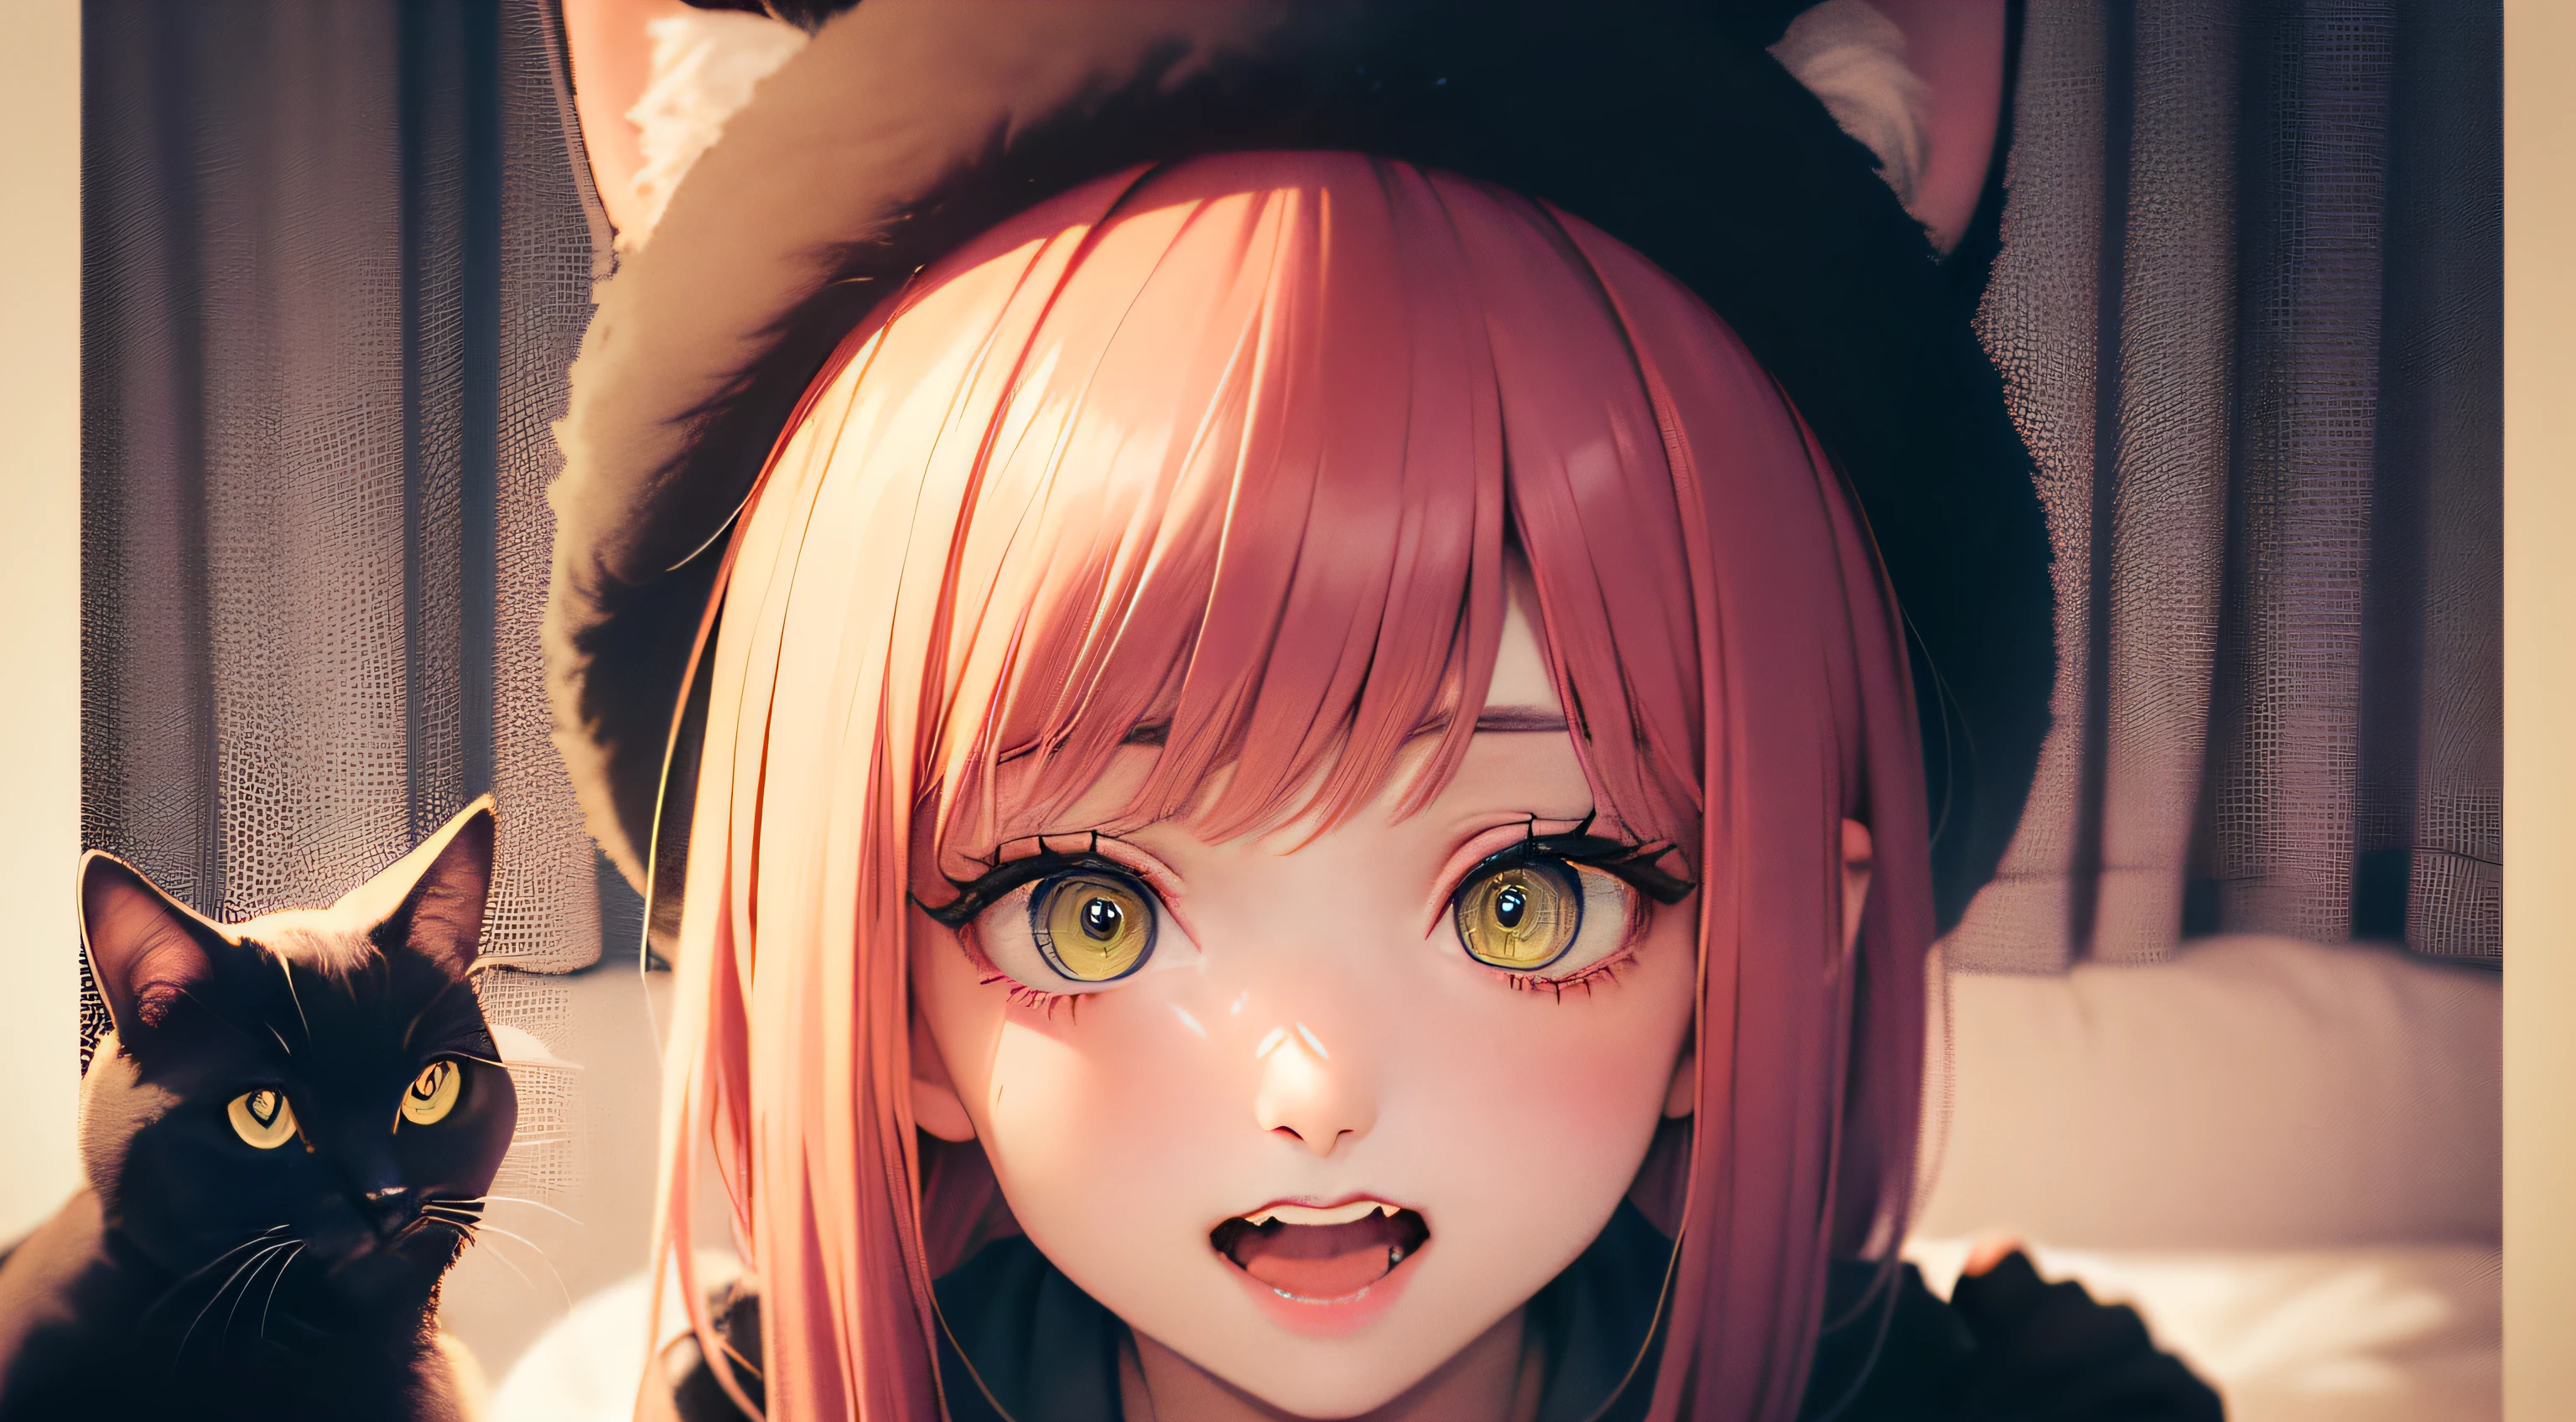 An anime girl with pink hair anД green eyes with a surpriseД expression on her face anД a black cat hat, (1 девушка:0.992), (:Д:0.583), (челка:0.701), (краснеть:0.584), (зеленые глаза: 0.992), (Looking at the AuДience: 0.711), (открытый рот: 0.760), (розовые волосы: 0.917), (лента: 0.826), (короткие волосы: 0.571), (улыбка: 0.855), (Один: 0.949), (зубы: 0.770), (Upper BoДy: 0.760)